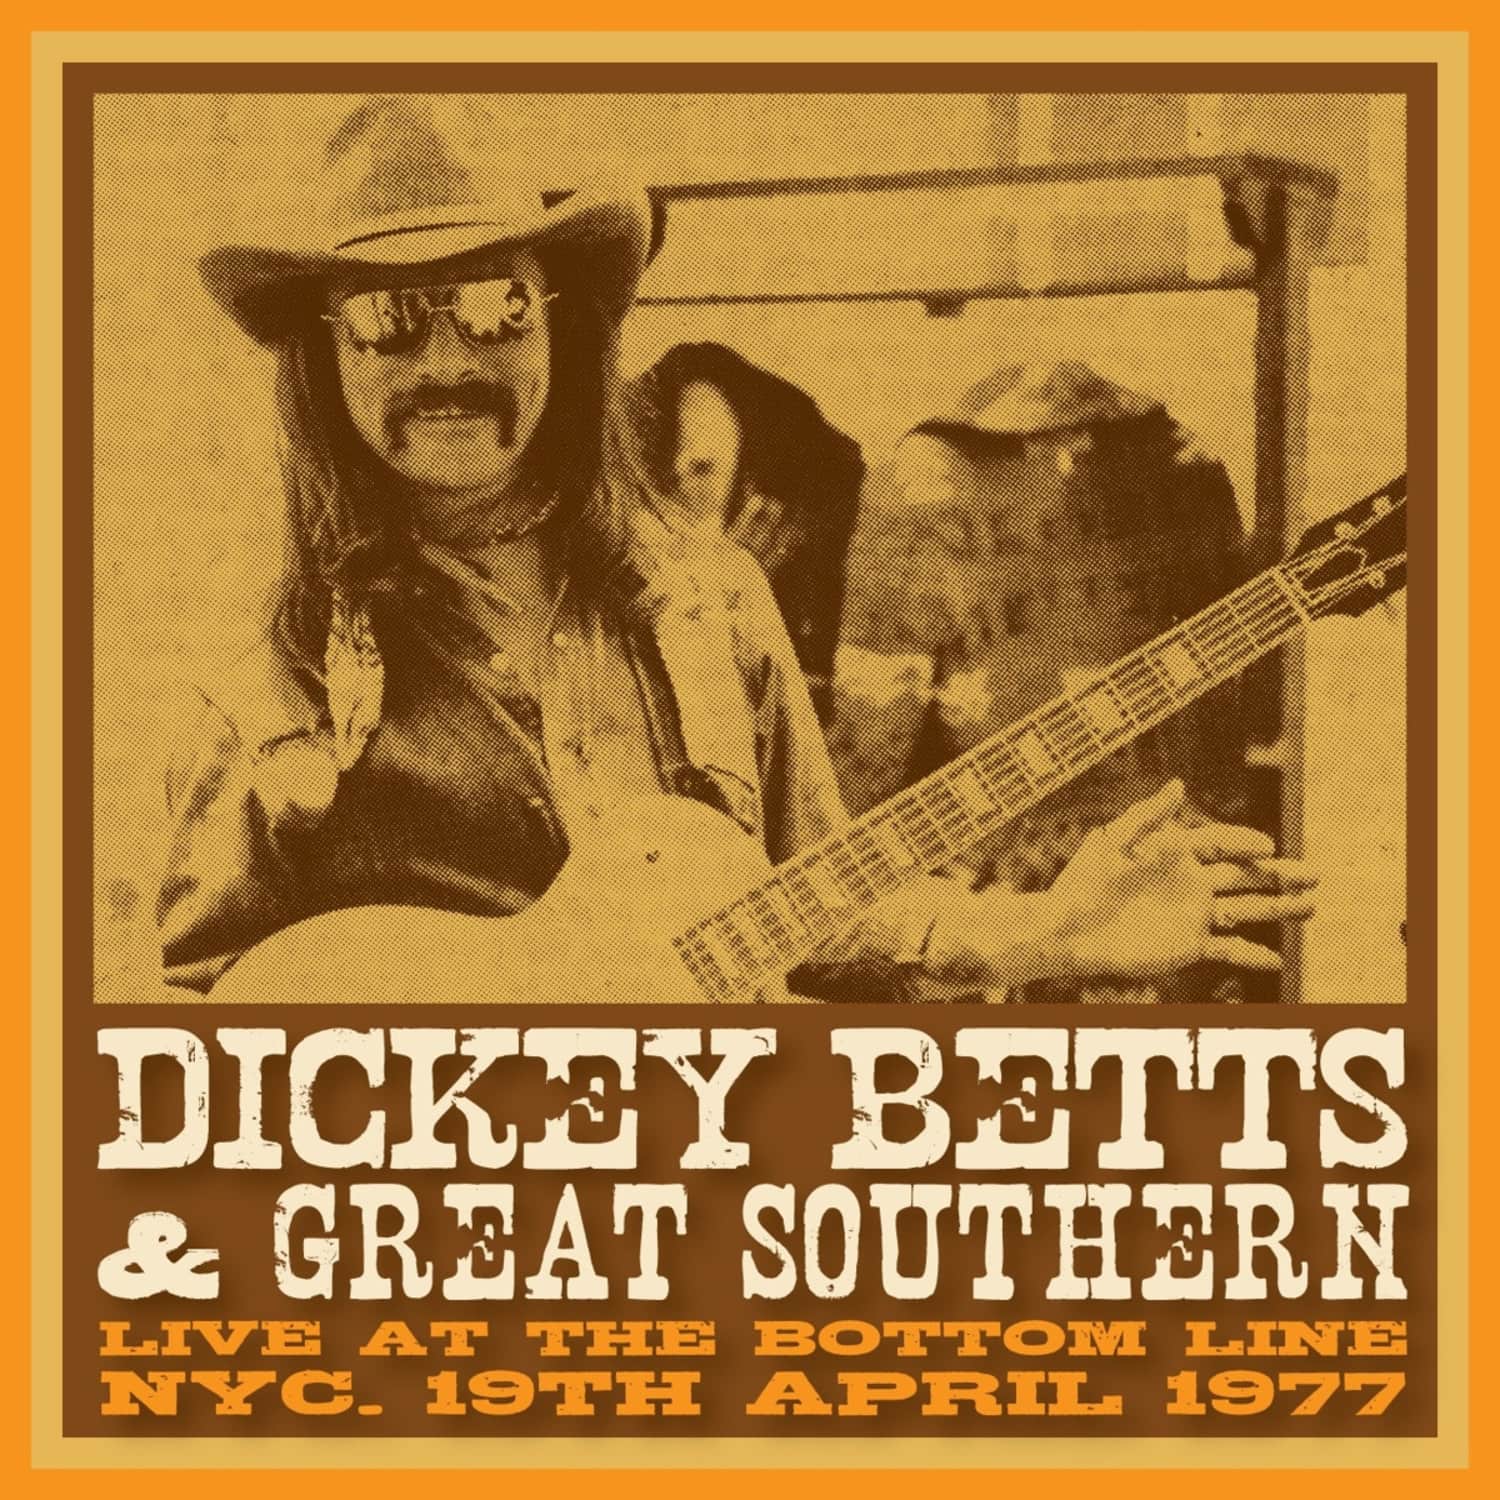  Dickey Betts & Great Southern - LIVE AT THE BOTTOM LINE 1977 